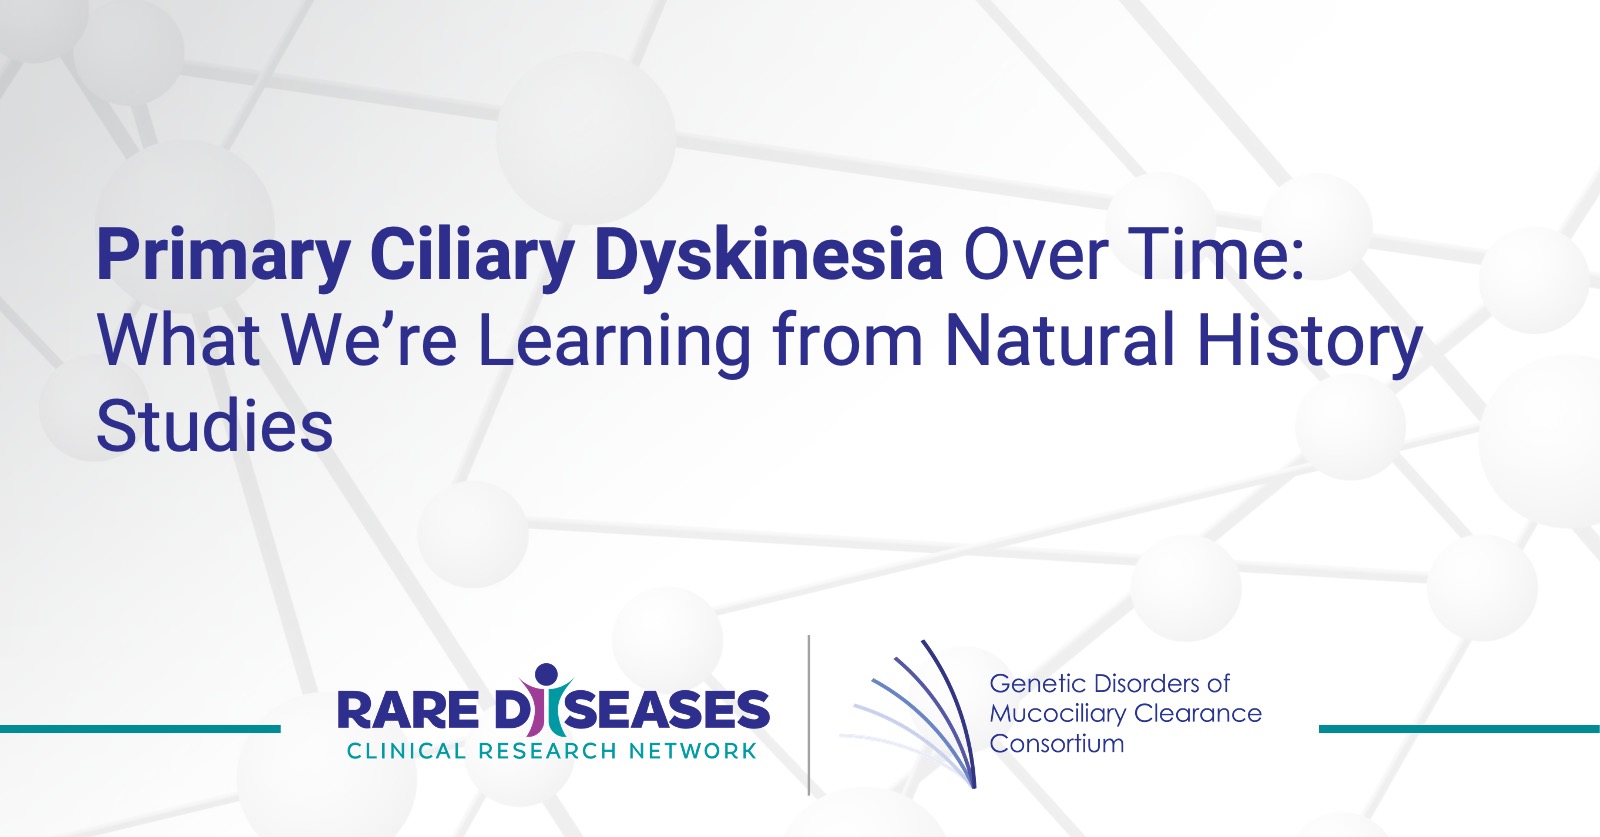 Primary Ciliary Dyskinesia Over Time: What We’re Learning from Natural History Studies